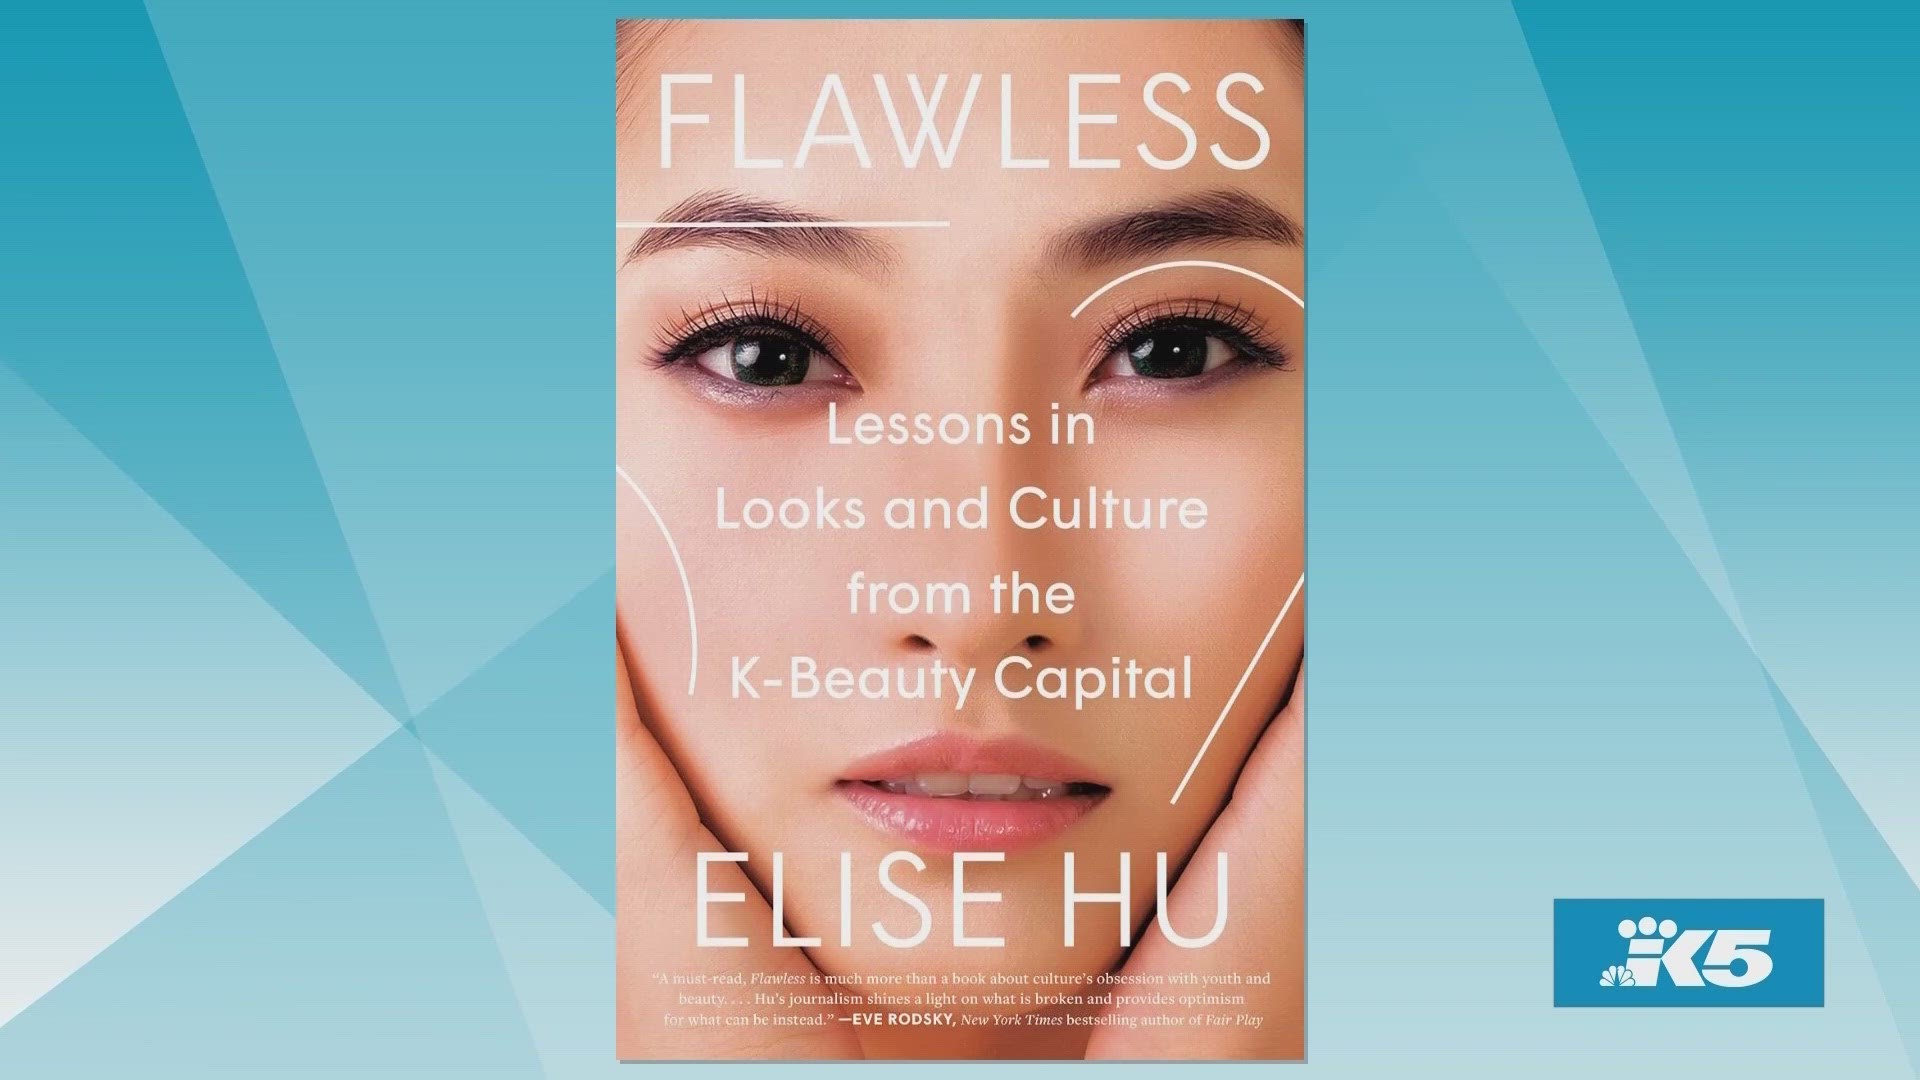 In her new book "Flawless," NPR's Elise Hu discusses the obsession with beauty she observed during her time working in South Korea.